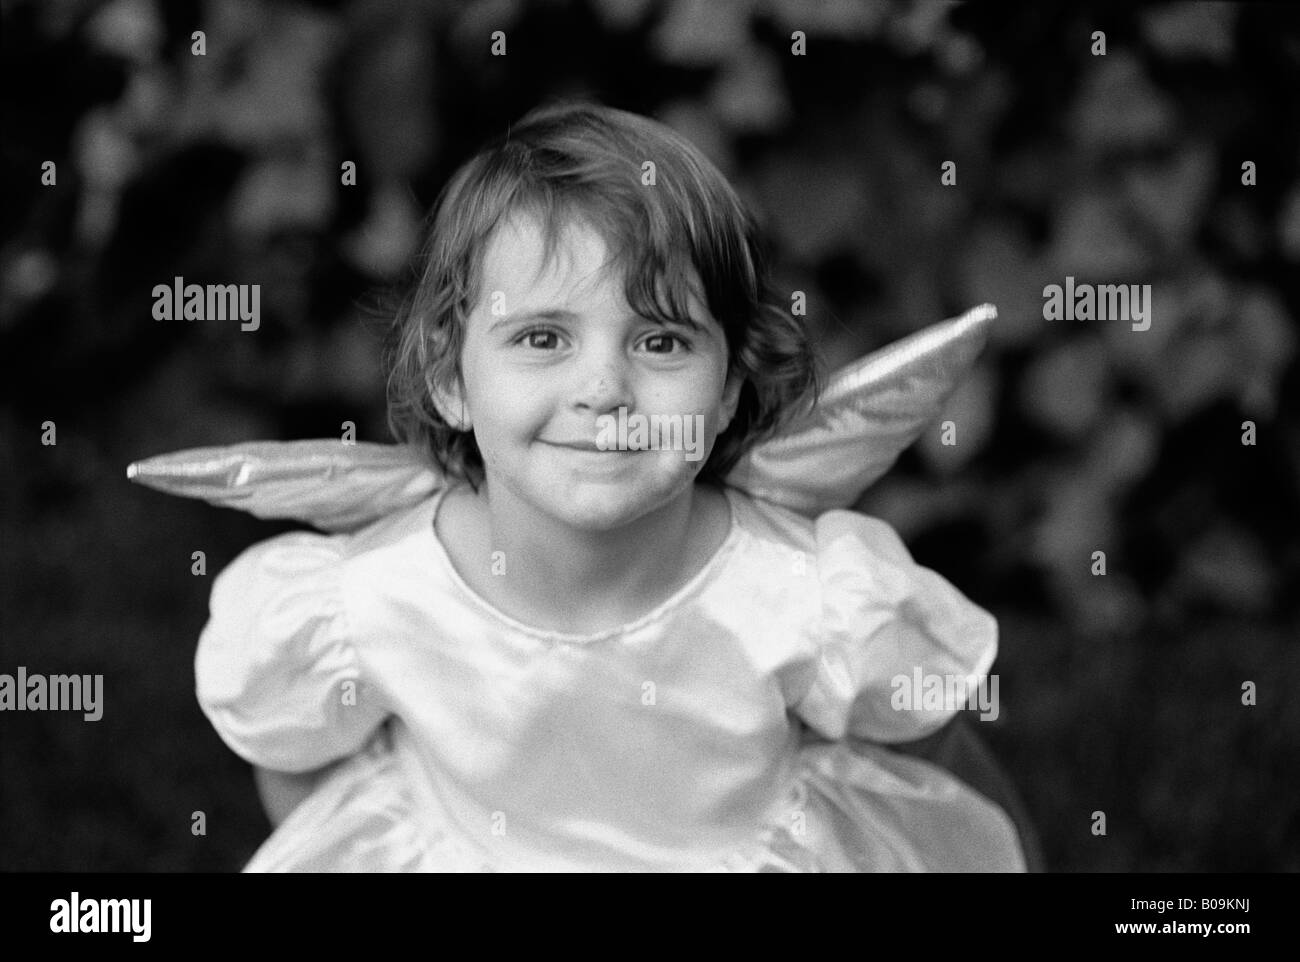 A young girl with angel wings and princess dress smiles for her portrait Stock Photo